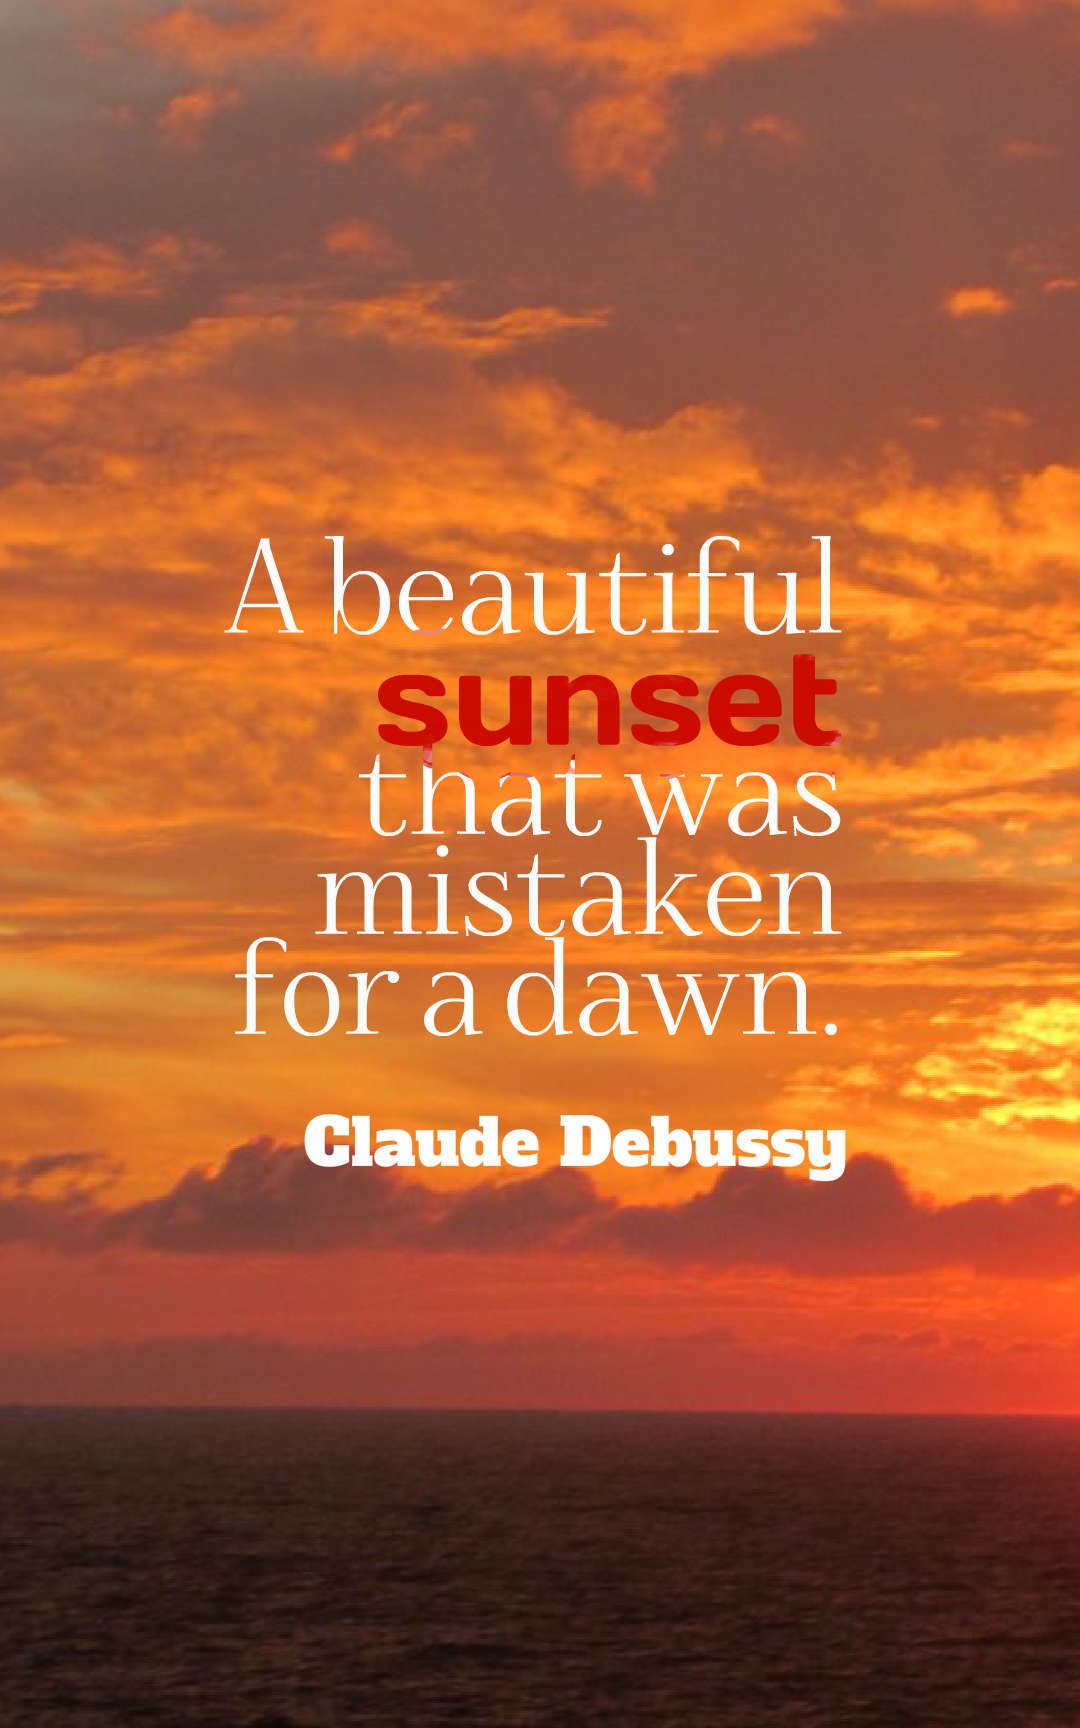 70 Beautiful Sunset Quotes With Images